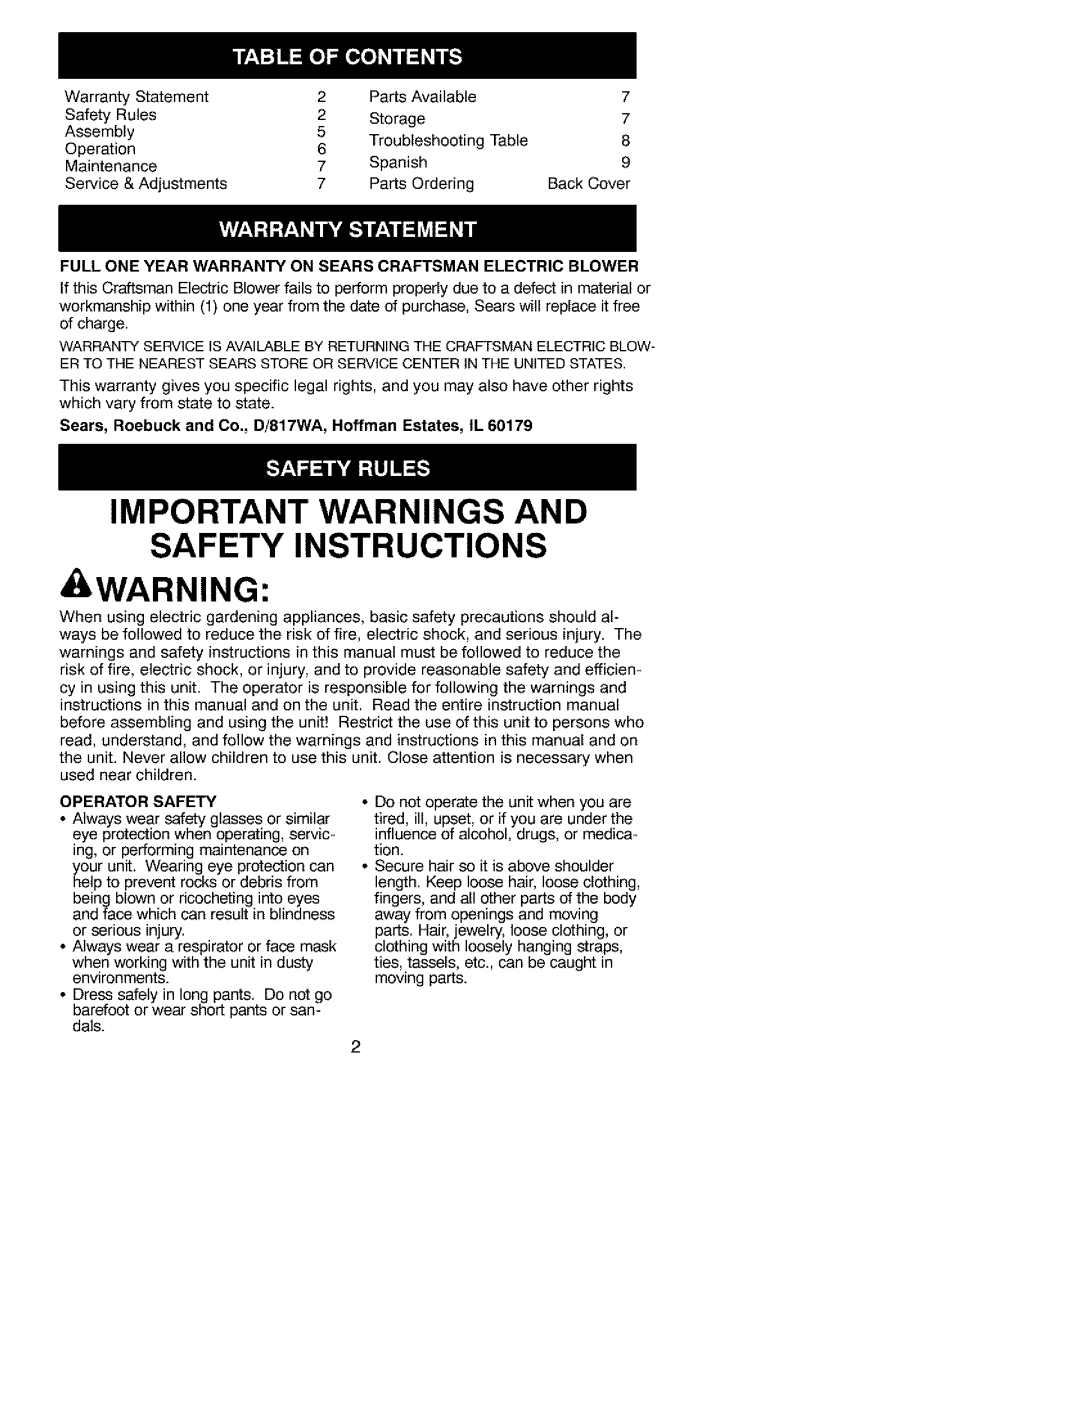 Craftsman 358.799341 instruction manual Important Warnings And Safety Instructions, Operator Safety 